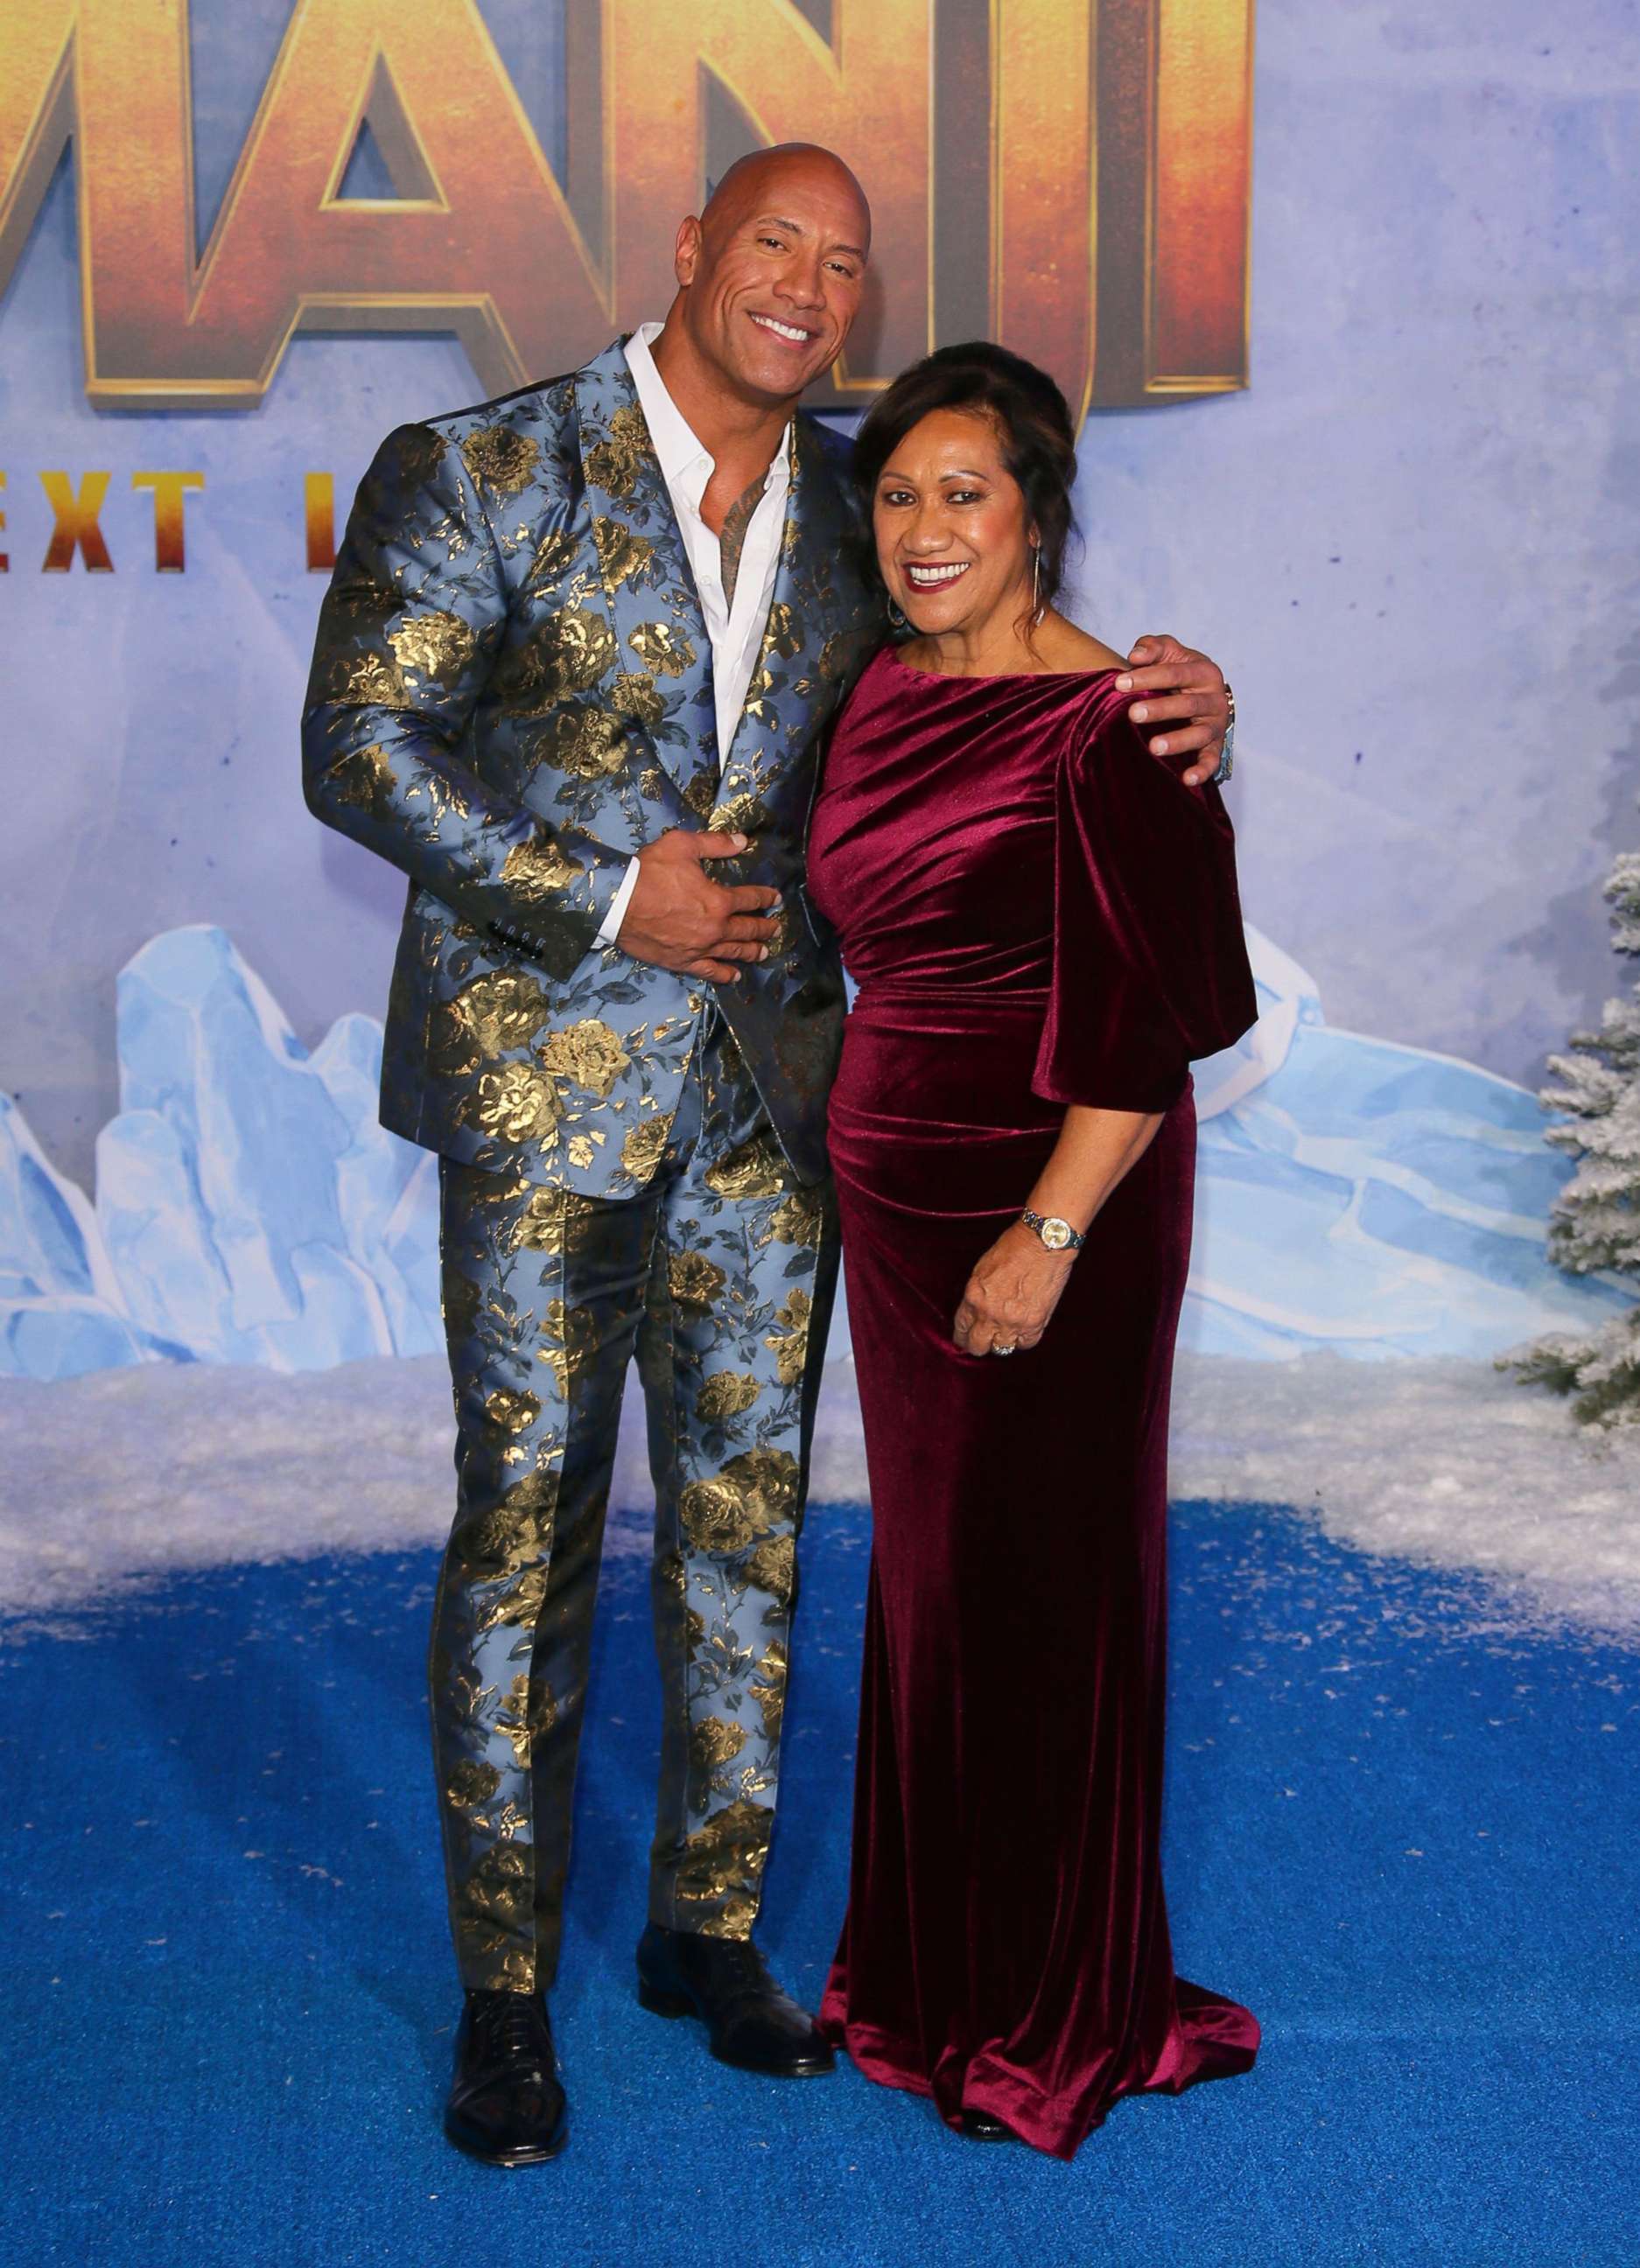 PHOTO: Dwayne Johnson and his mother Ata Johnson attend the premiere of "Jumanji: The Next Level" in Hollywood on Dec. 9, 2019. 